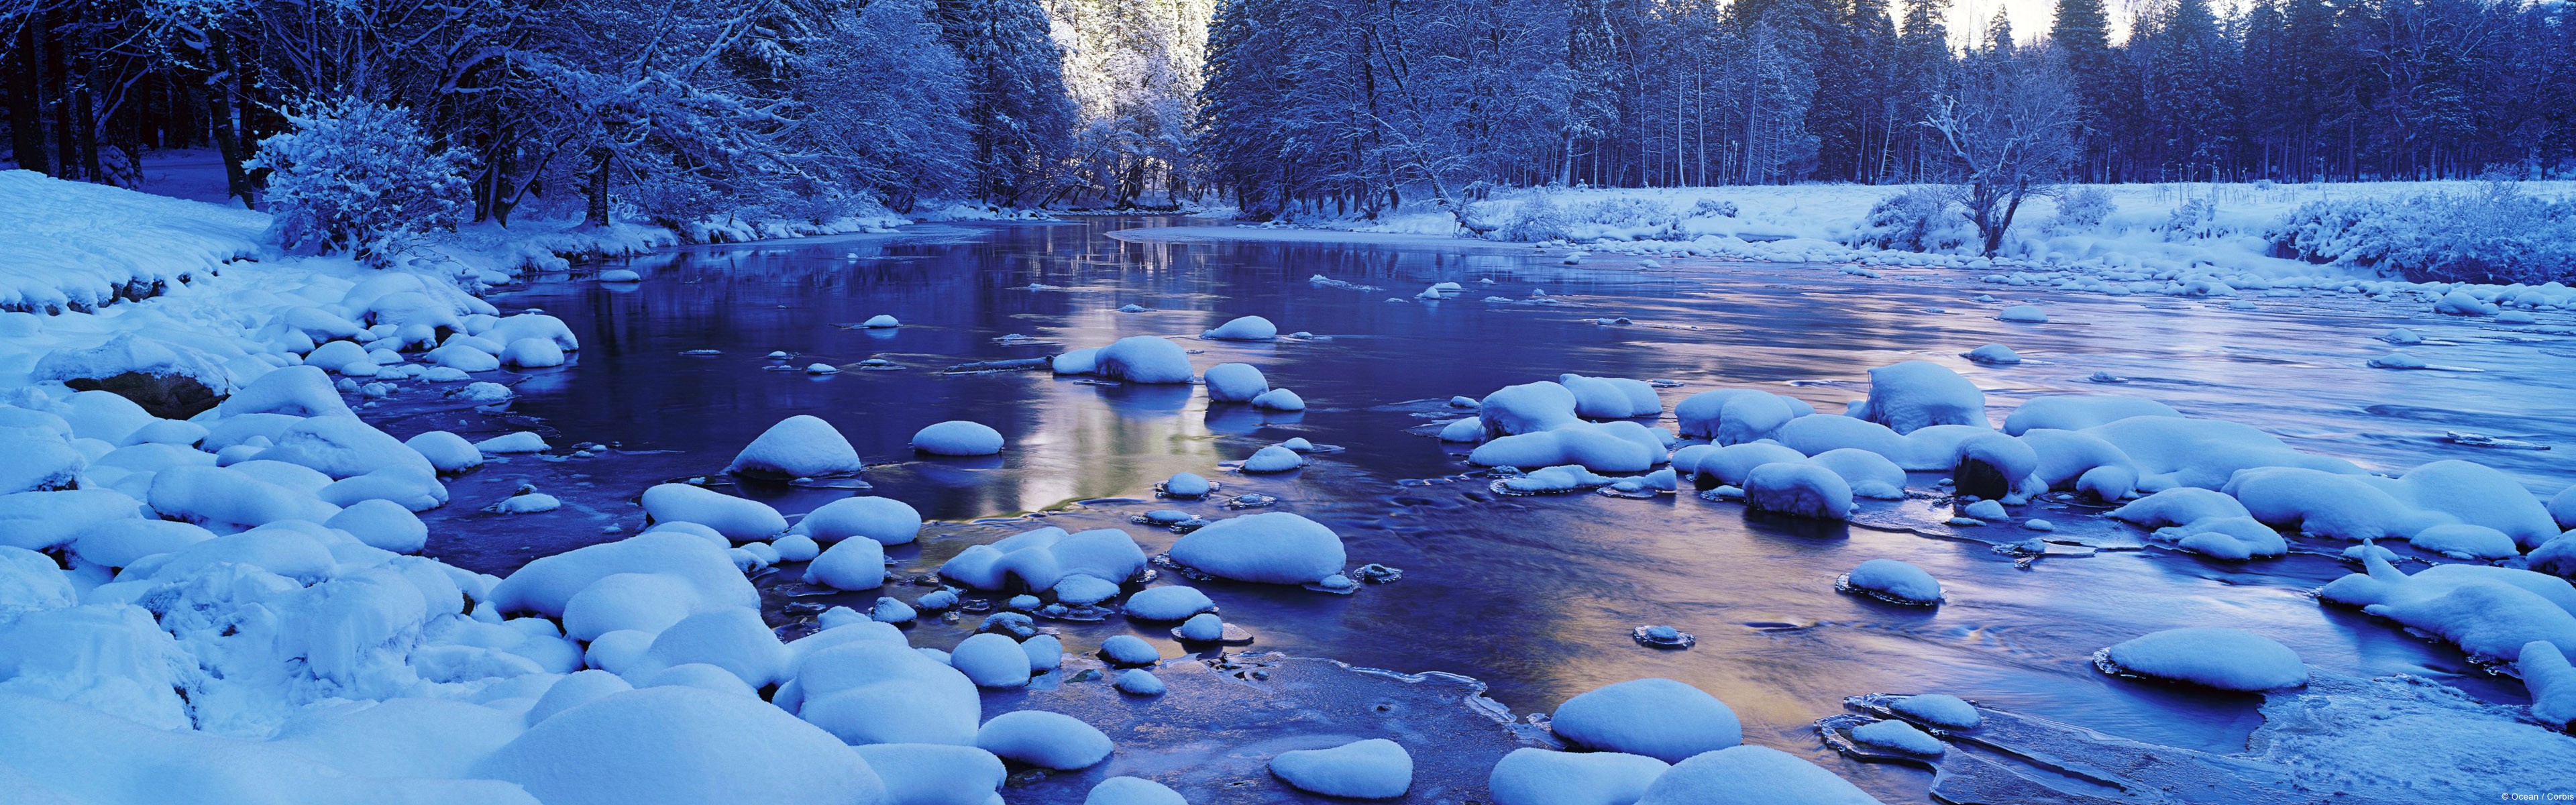 General 3840x1200 nature landscape snow winter water cold outdoors river